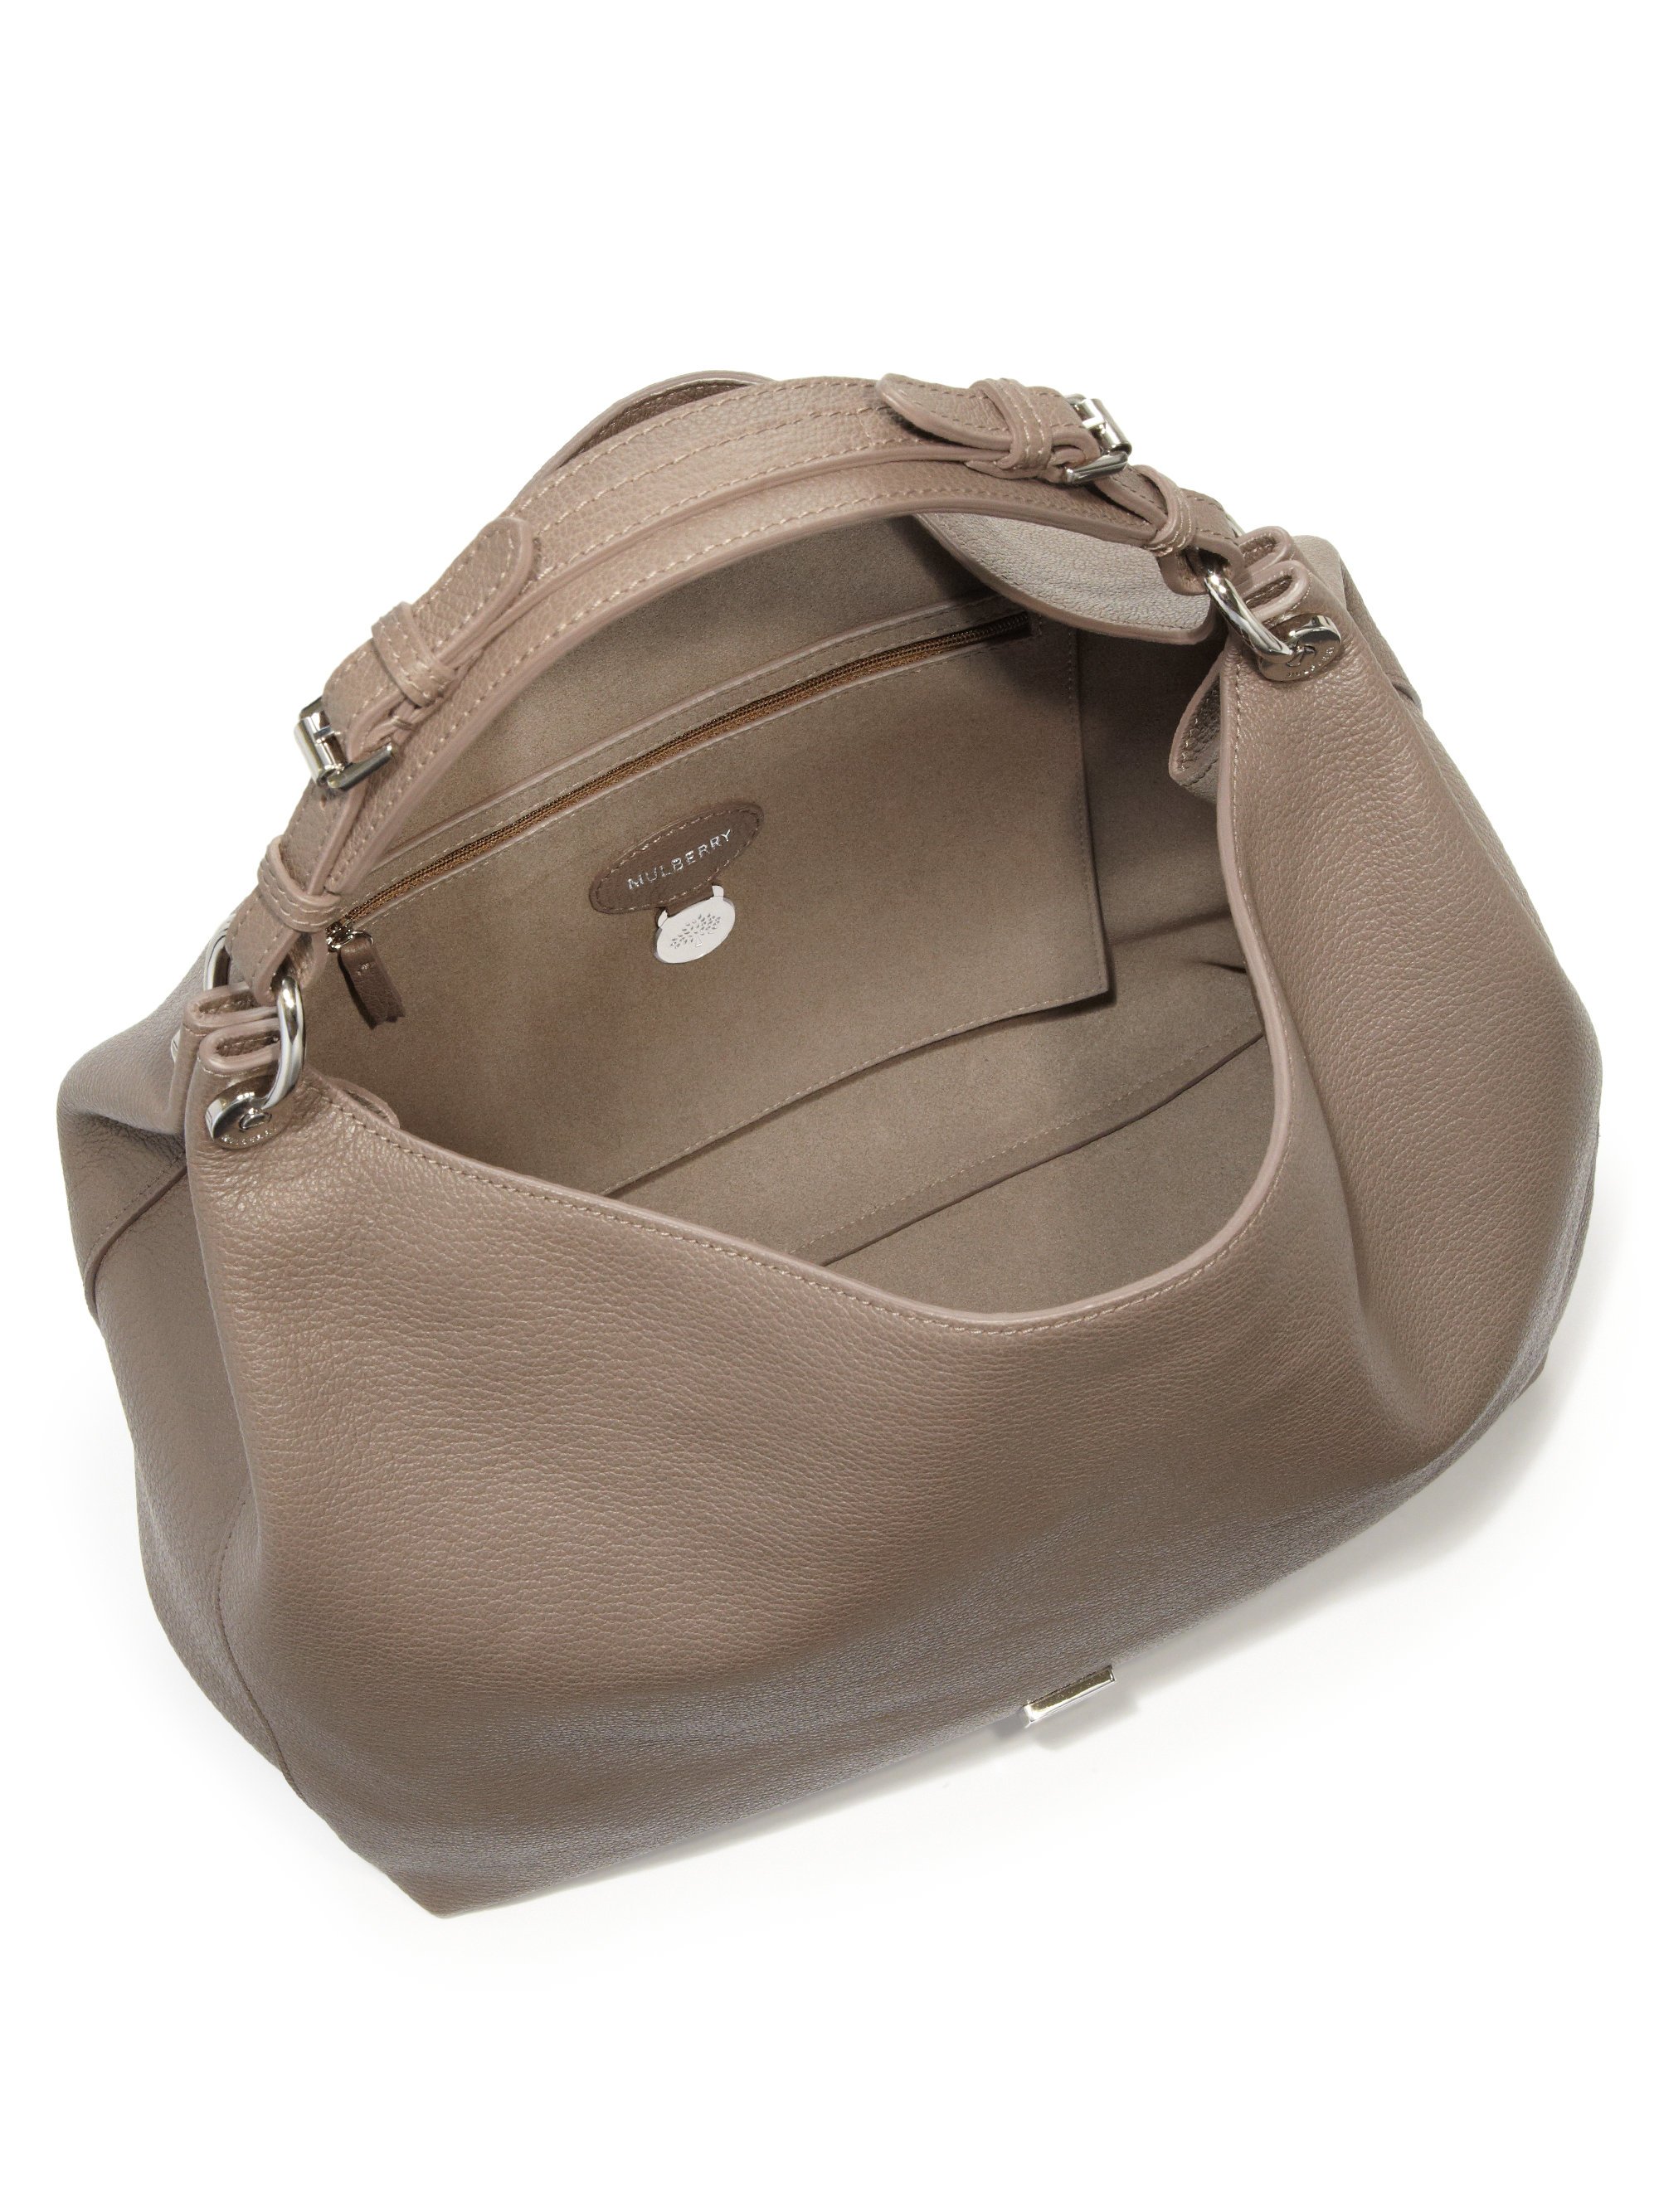 Lyst - Mulberry Freya Leather Hobo Bag in Gray